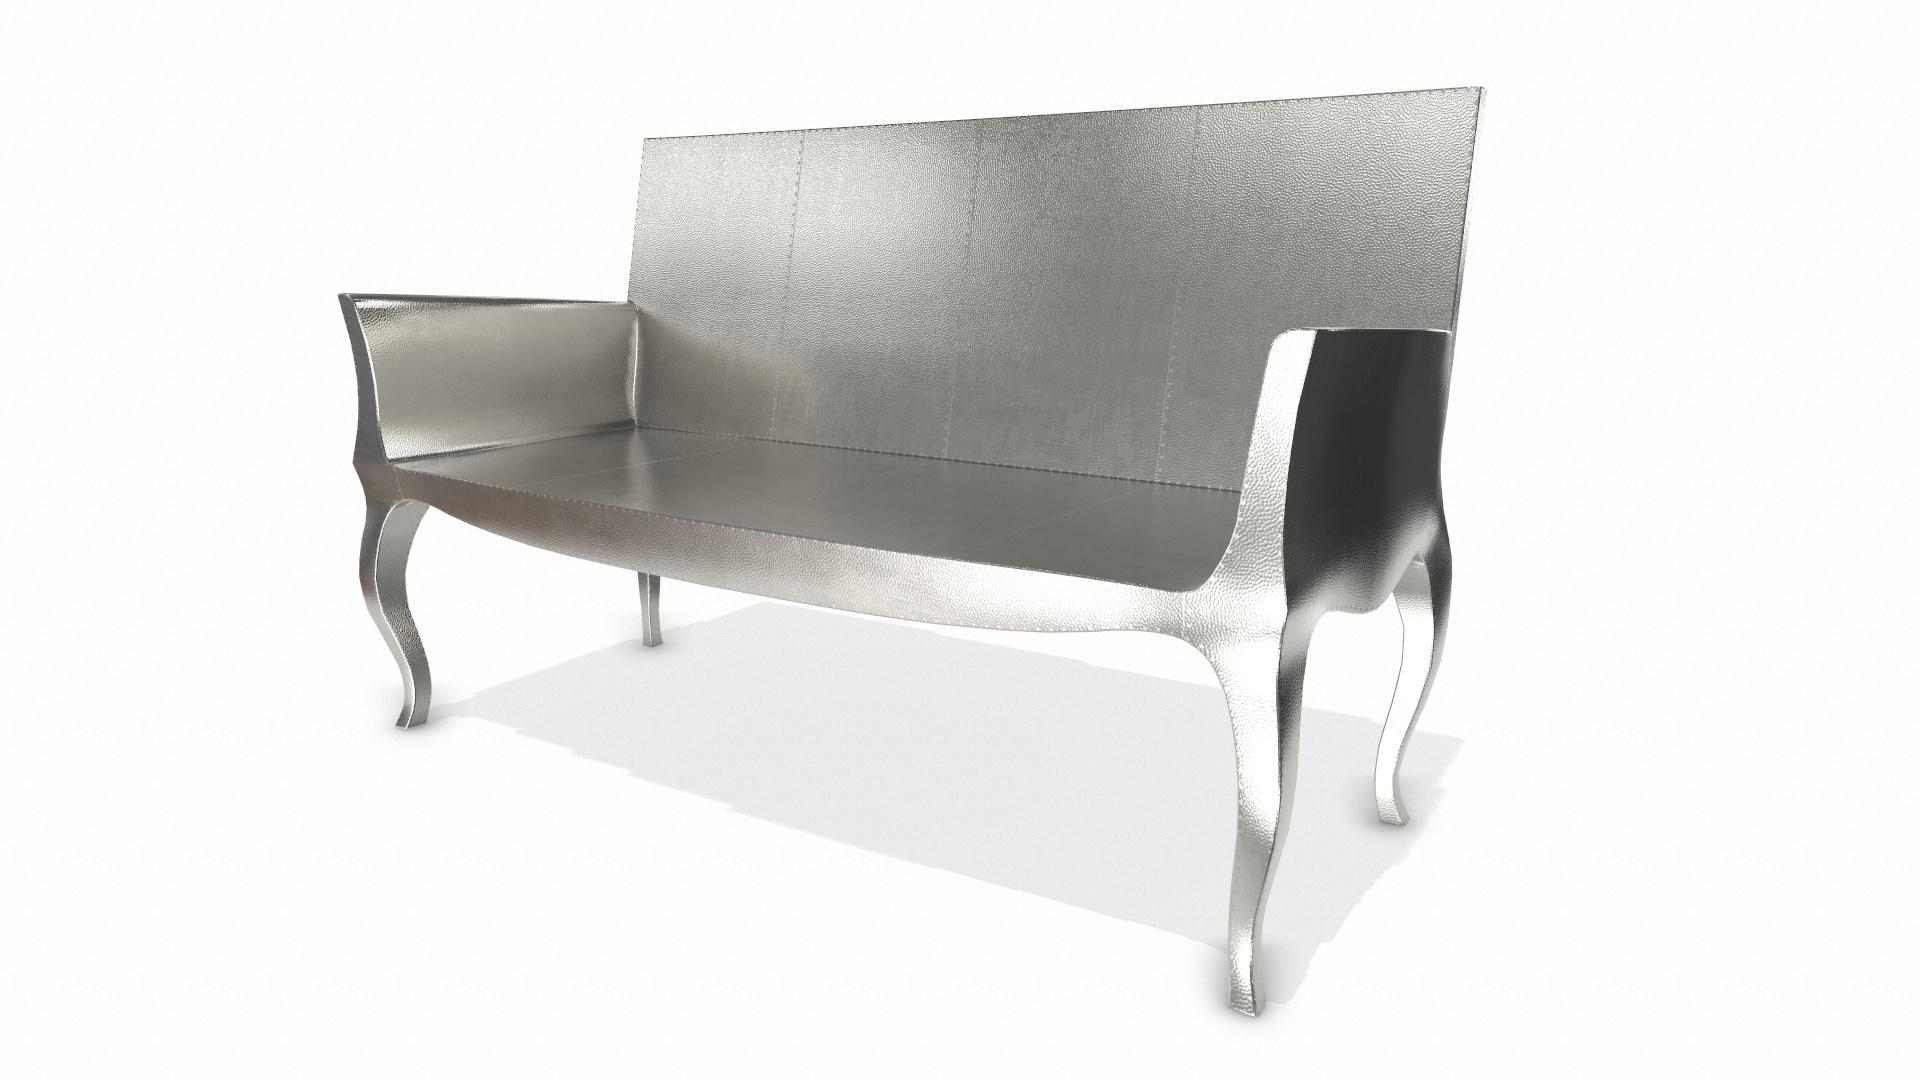 American Louise Settee Art Deco Benches in Mid. Hammered White Bronze by Paul Mathieu For Sale